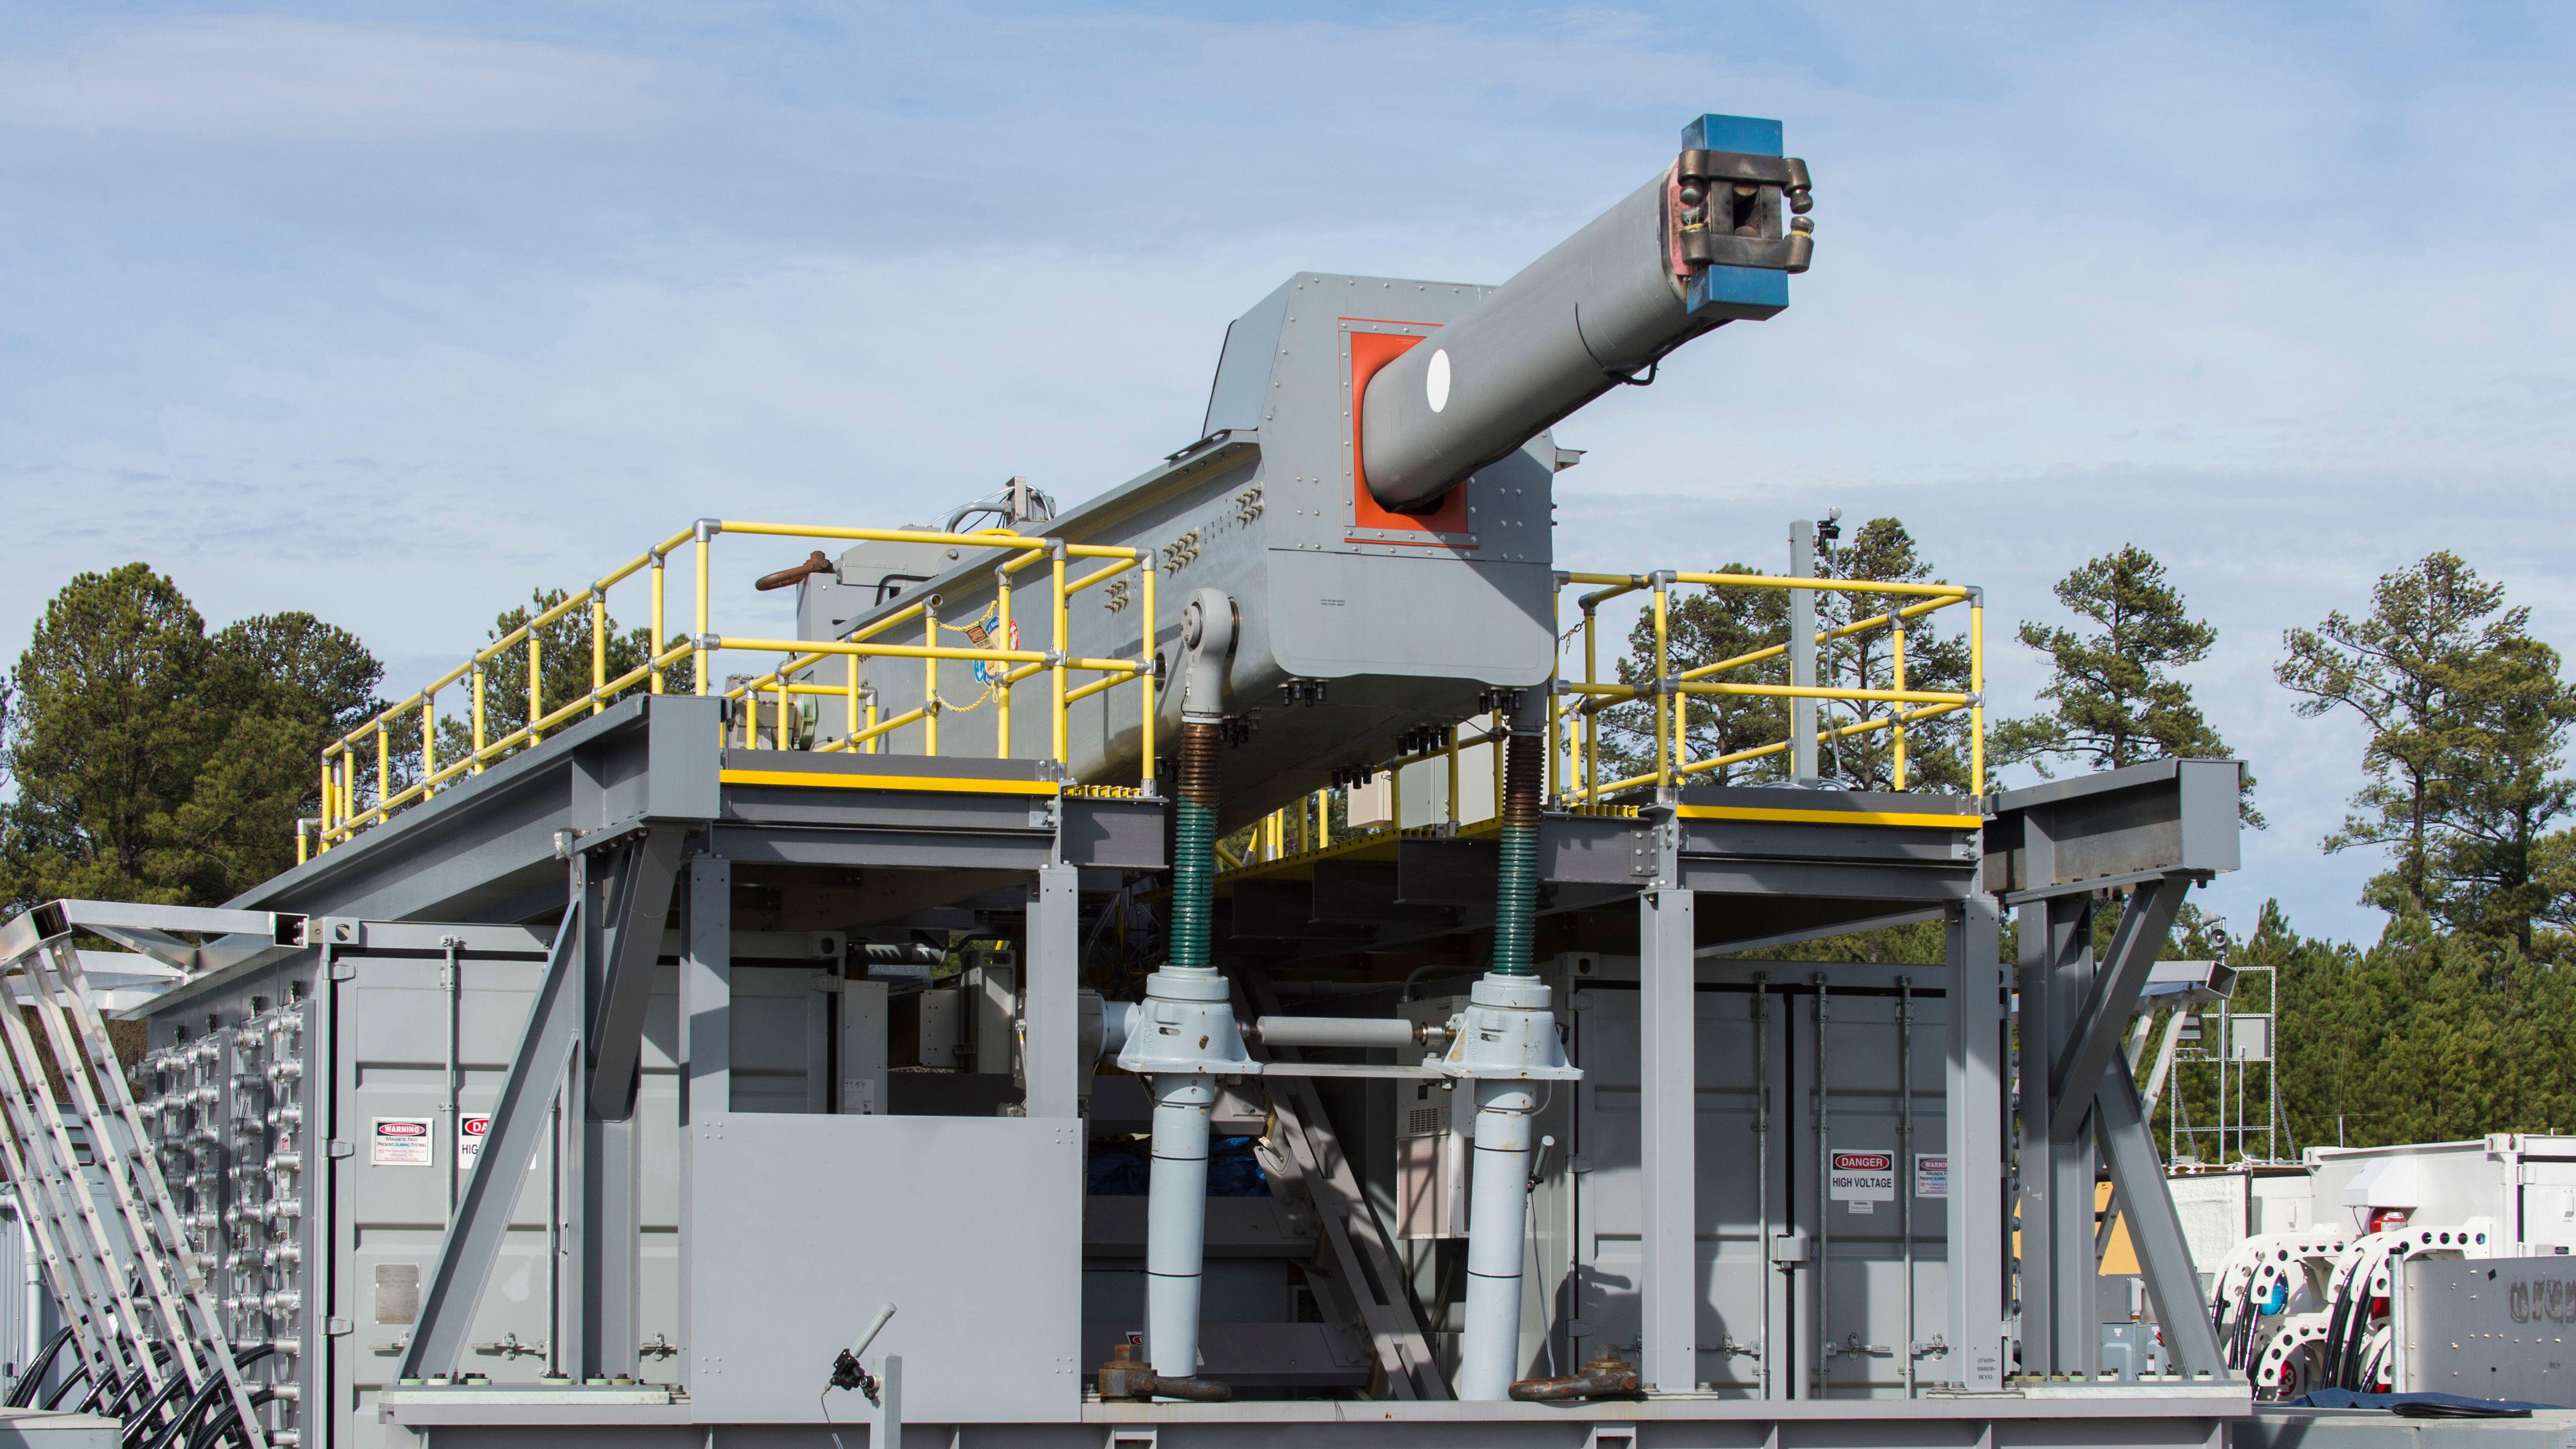 An electromagnetic railgun displayed is a long-range weapon that fires projectiles using electricity instead of chemical propellants.